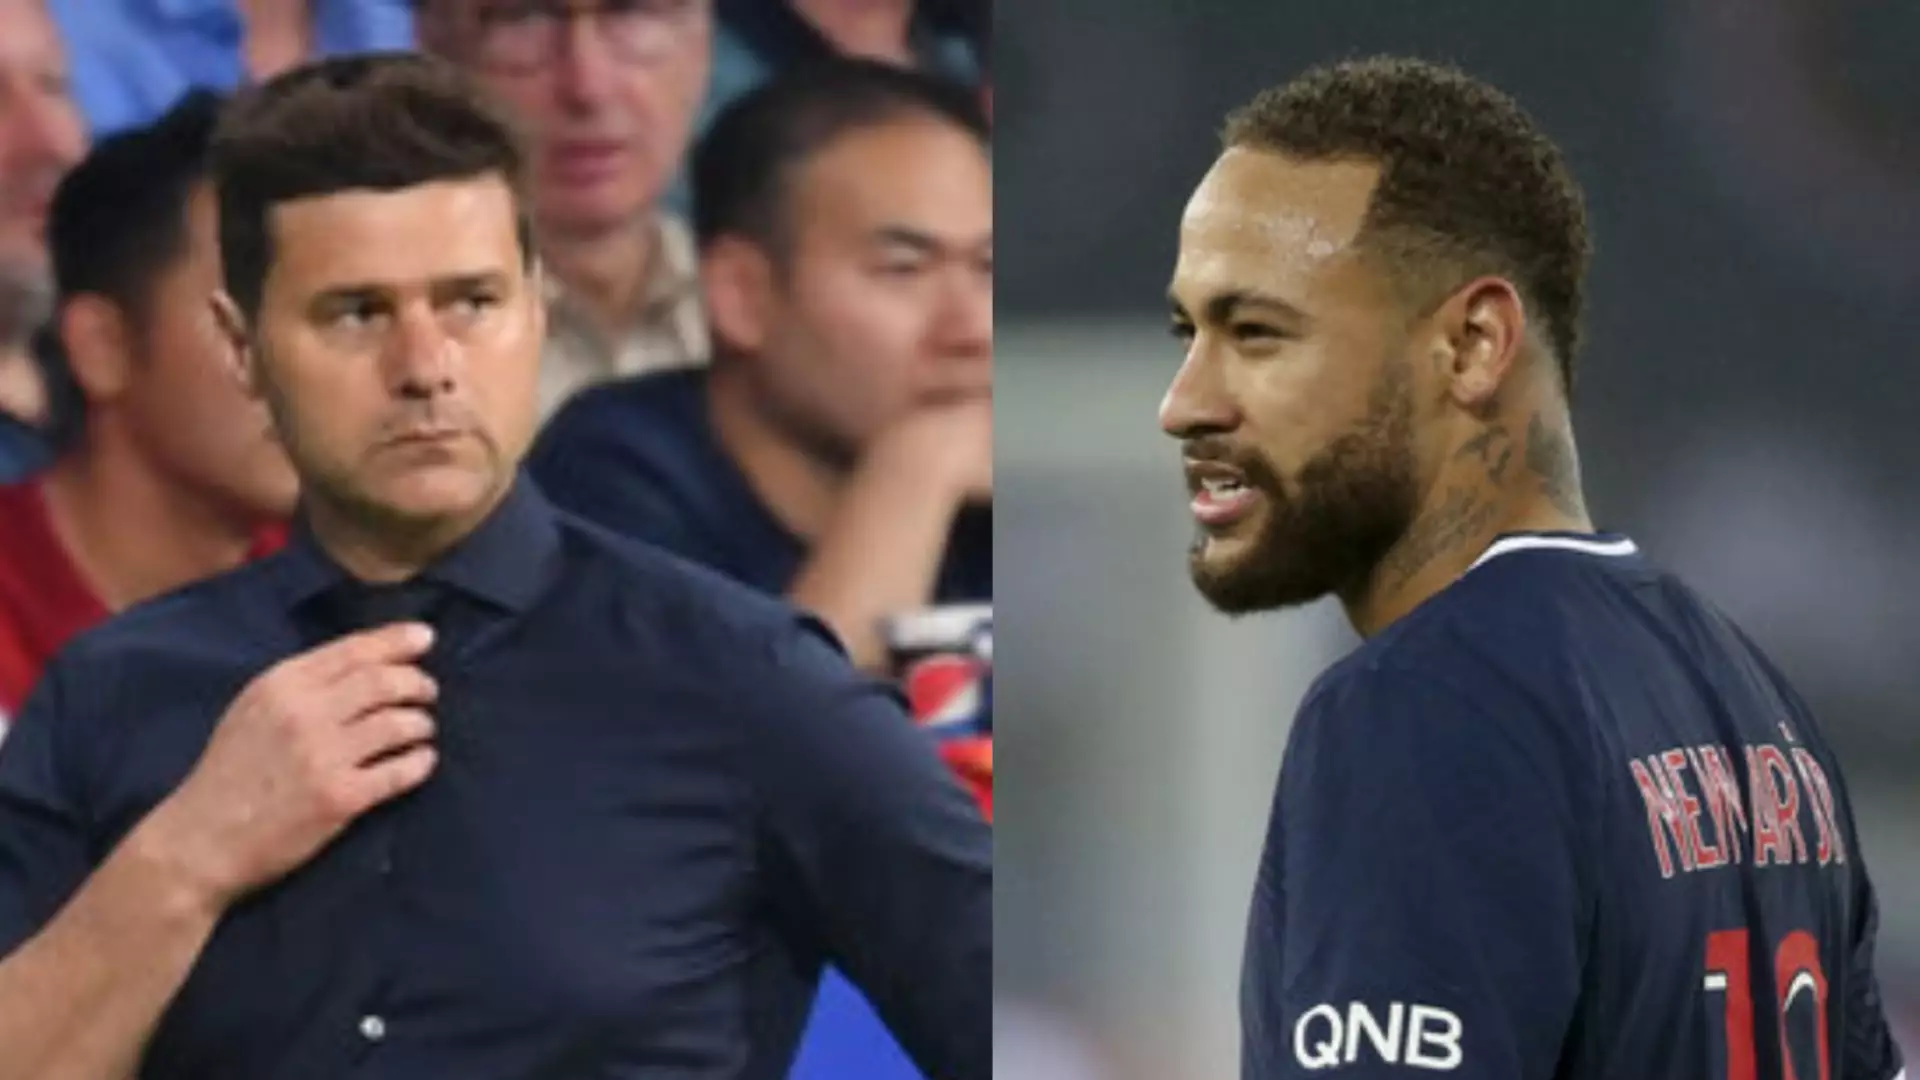 Pochettino v Neymar and Mbappe? Football Fans Very Unsure About PSG Appointment